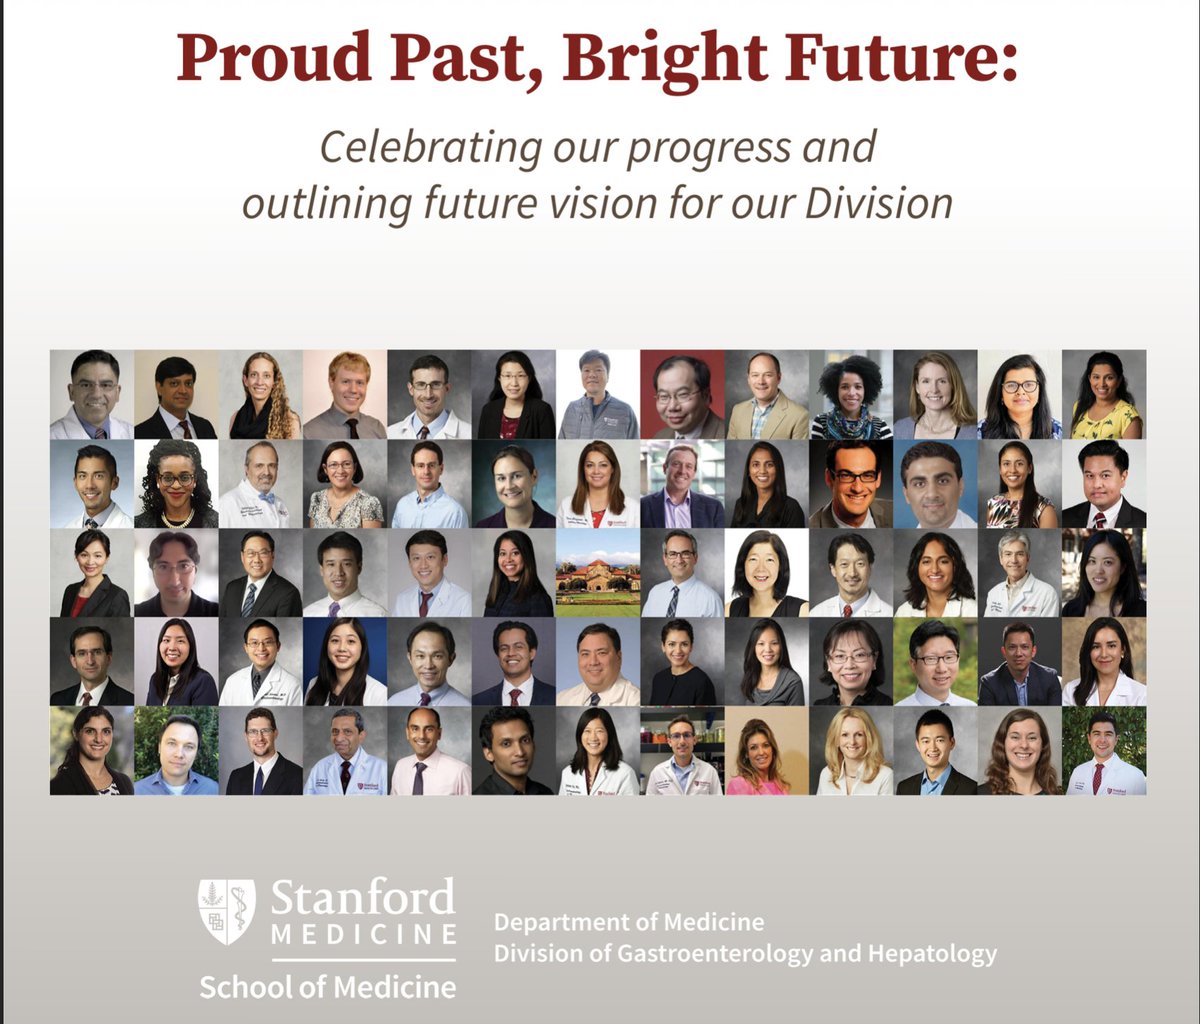 Check out our special newsletter where we- 🔴Celebrate the division's accomplishments over the past decade, fueled by the power of teamwork under the leadership of @WRayKimMD! 🔴 Outline plans to create an even brighter future! #Leadership #Teamwork med.stanford.edu/content/dam/sm…